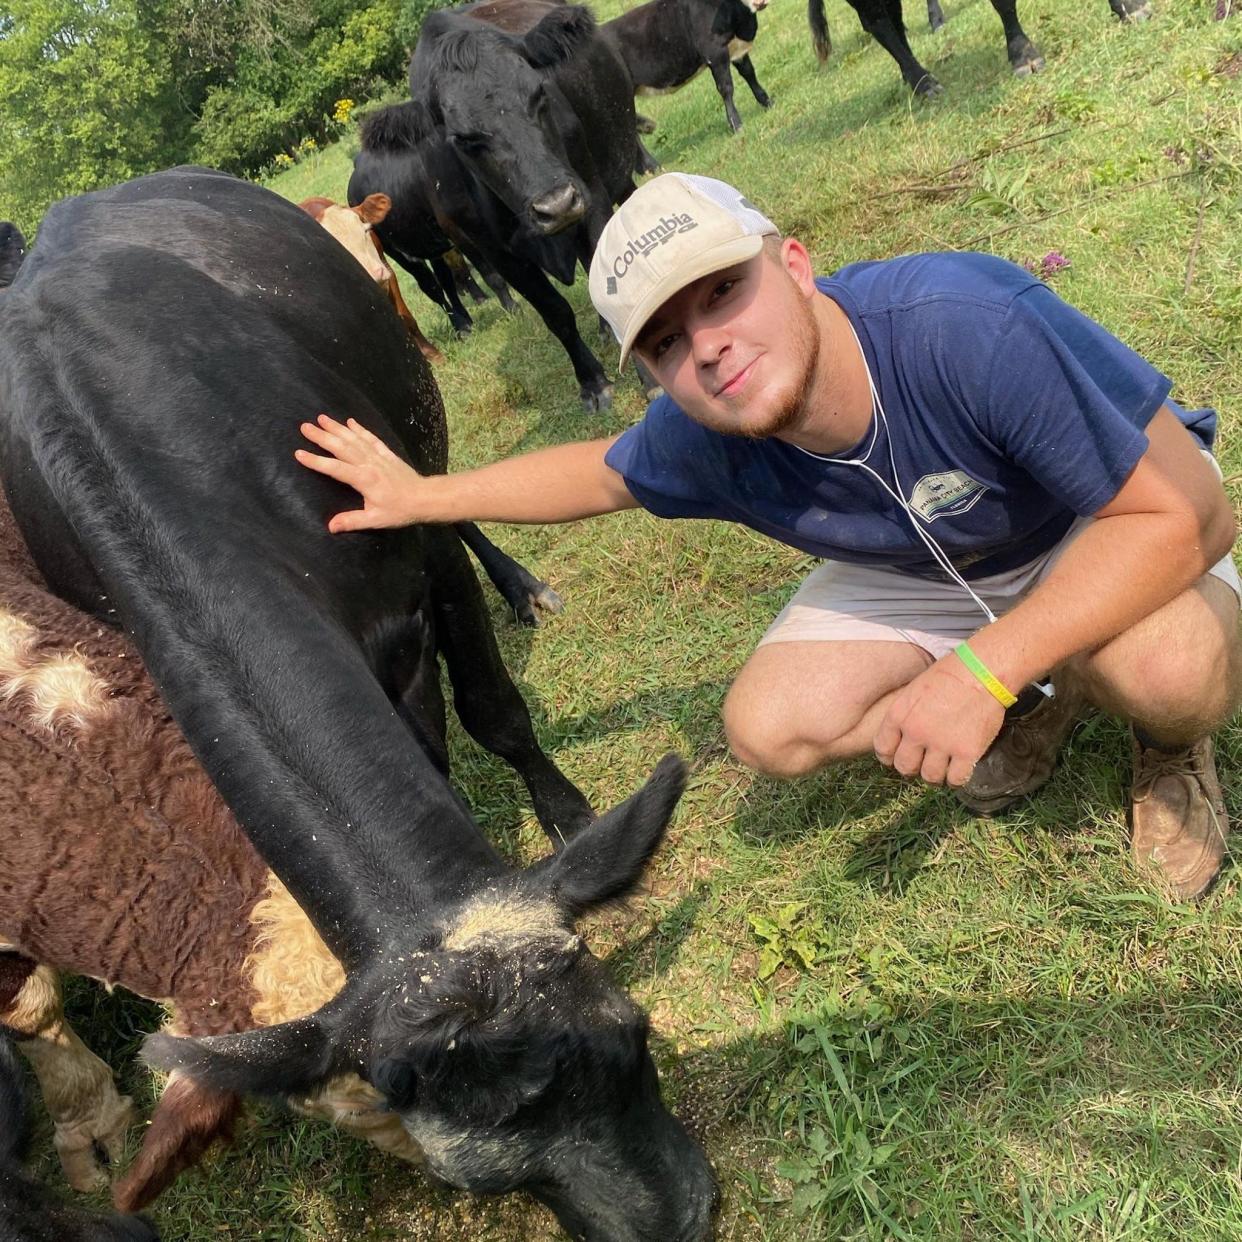 Will Warner, 22, squats down and pets a cow in this undated photo.